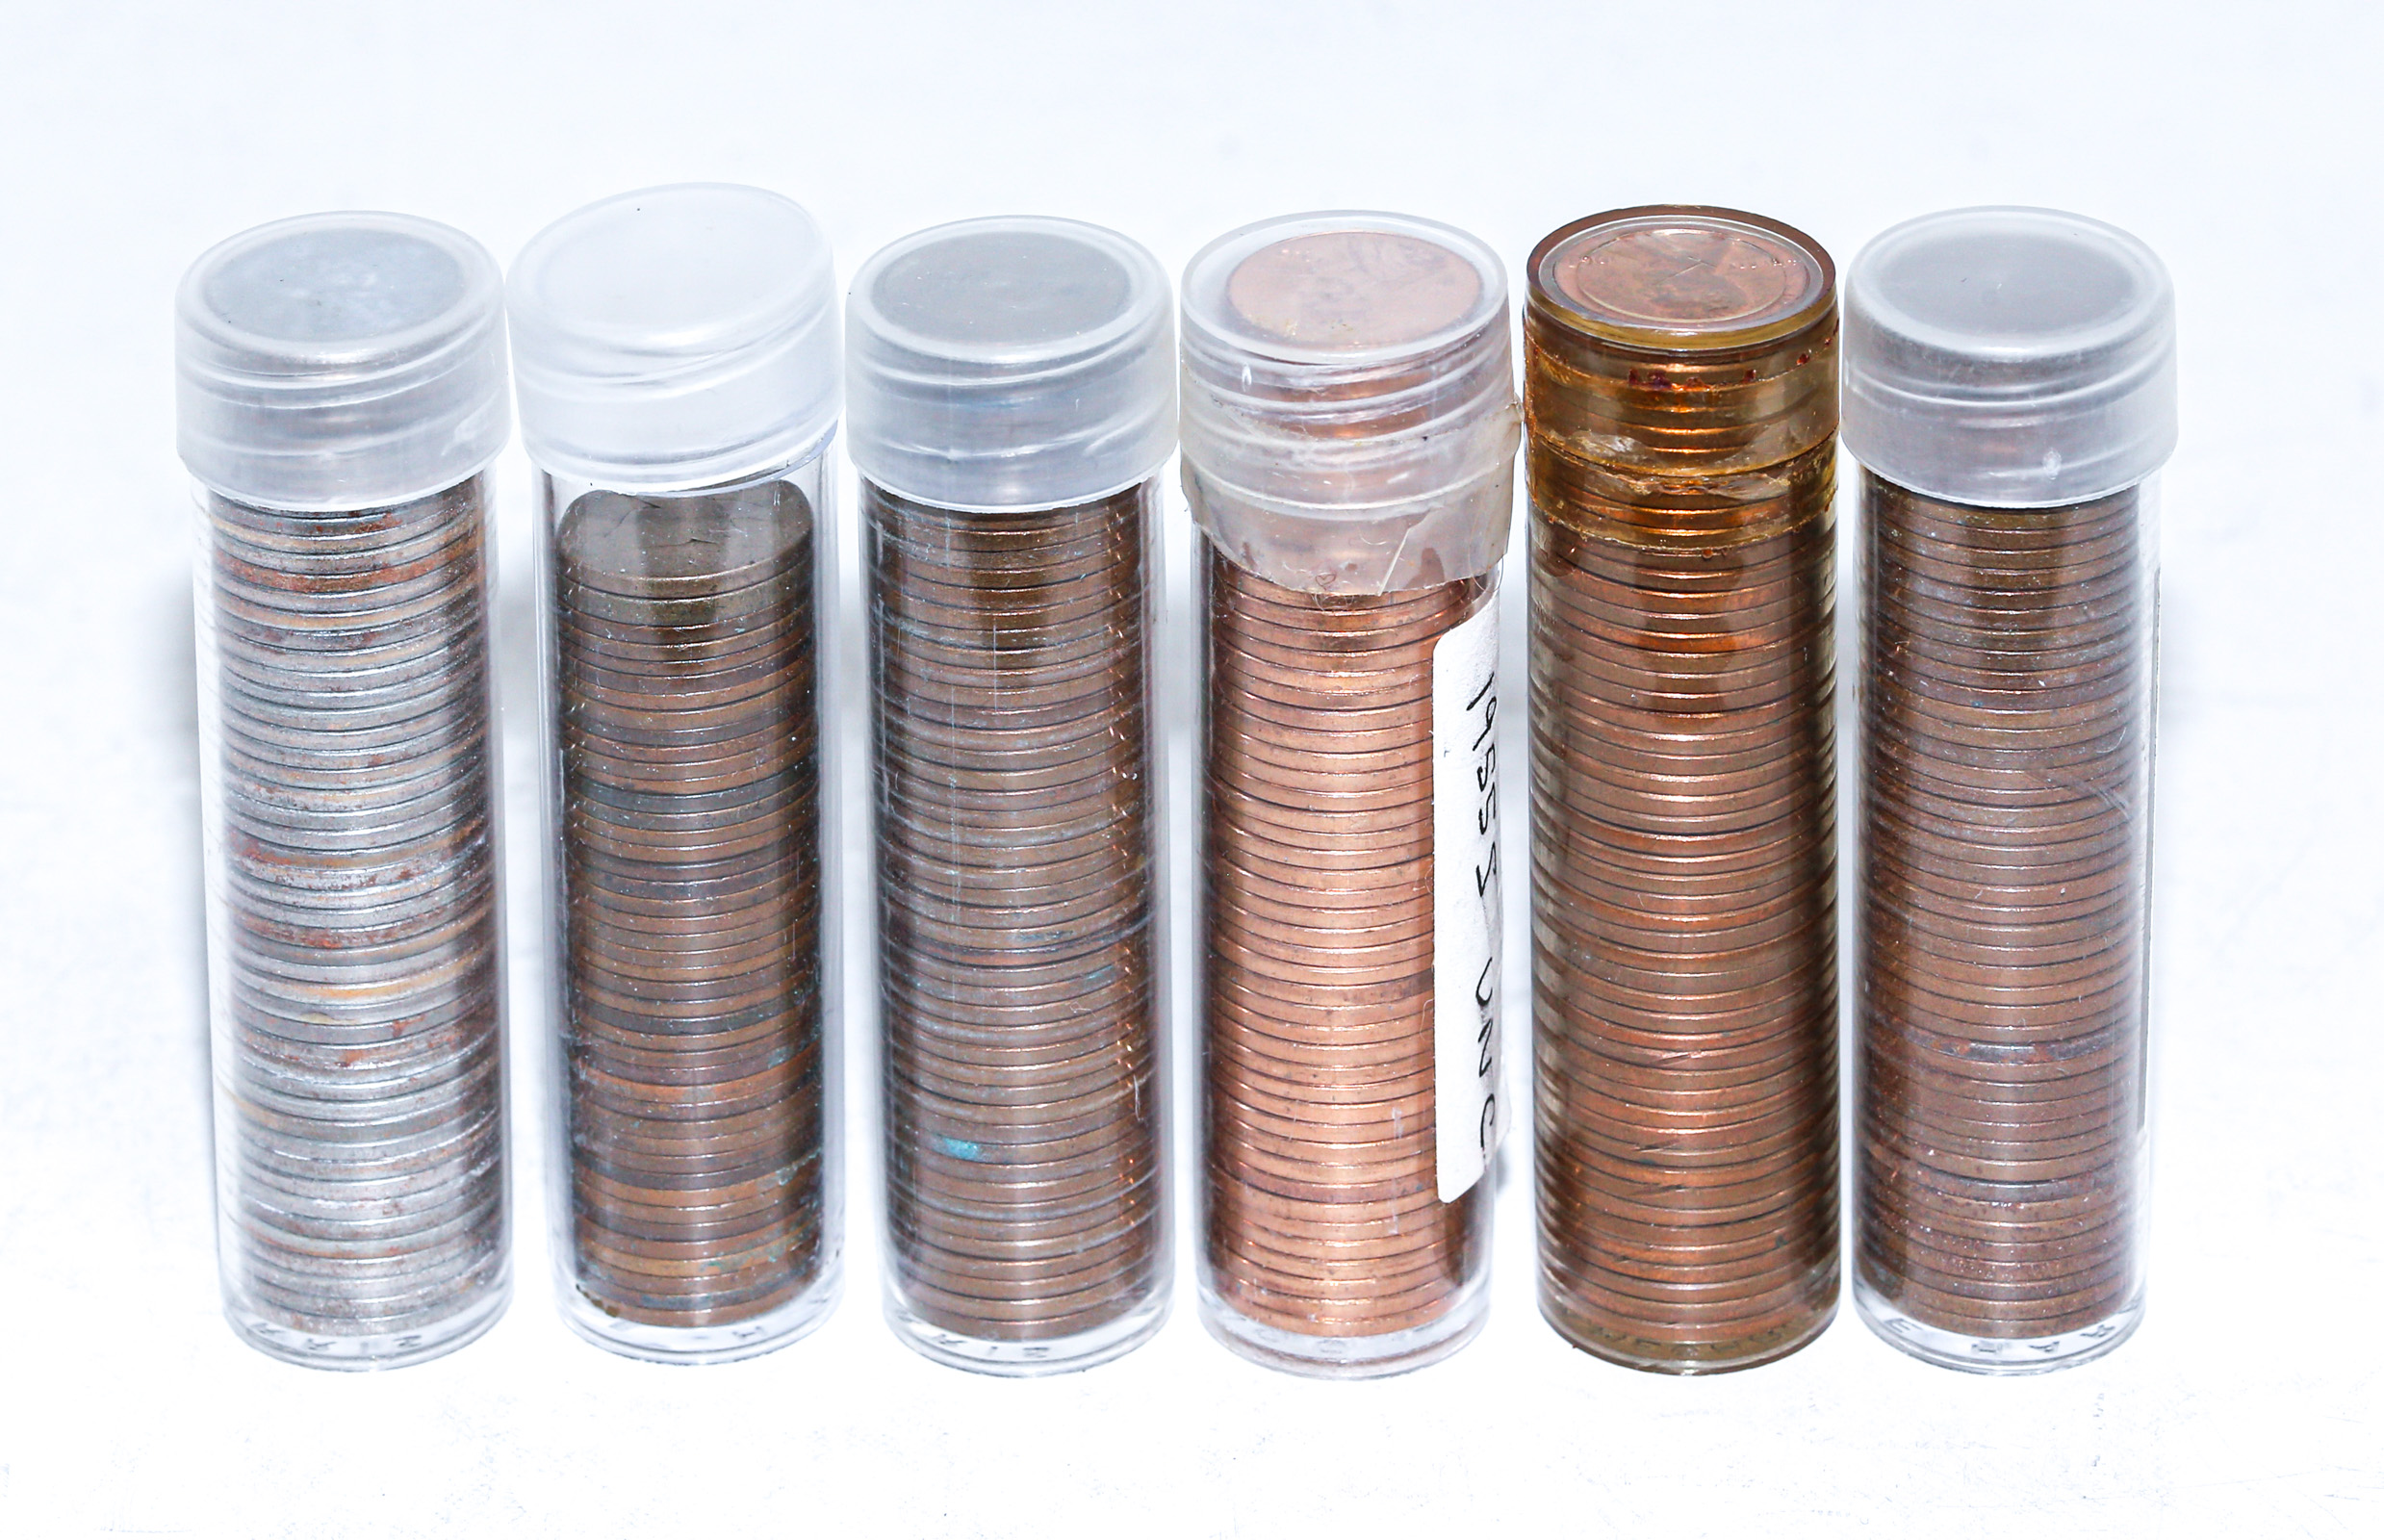 VARIETY OF SIX ROLLS OF COINS 42